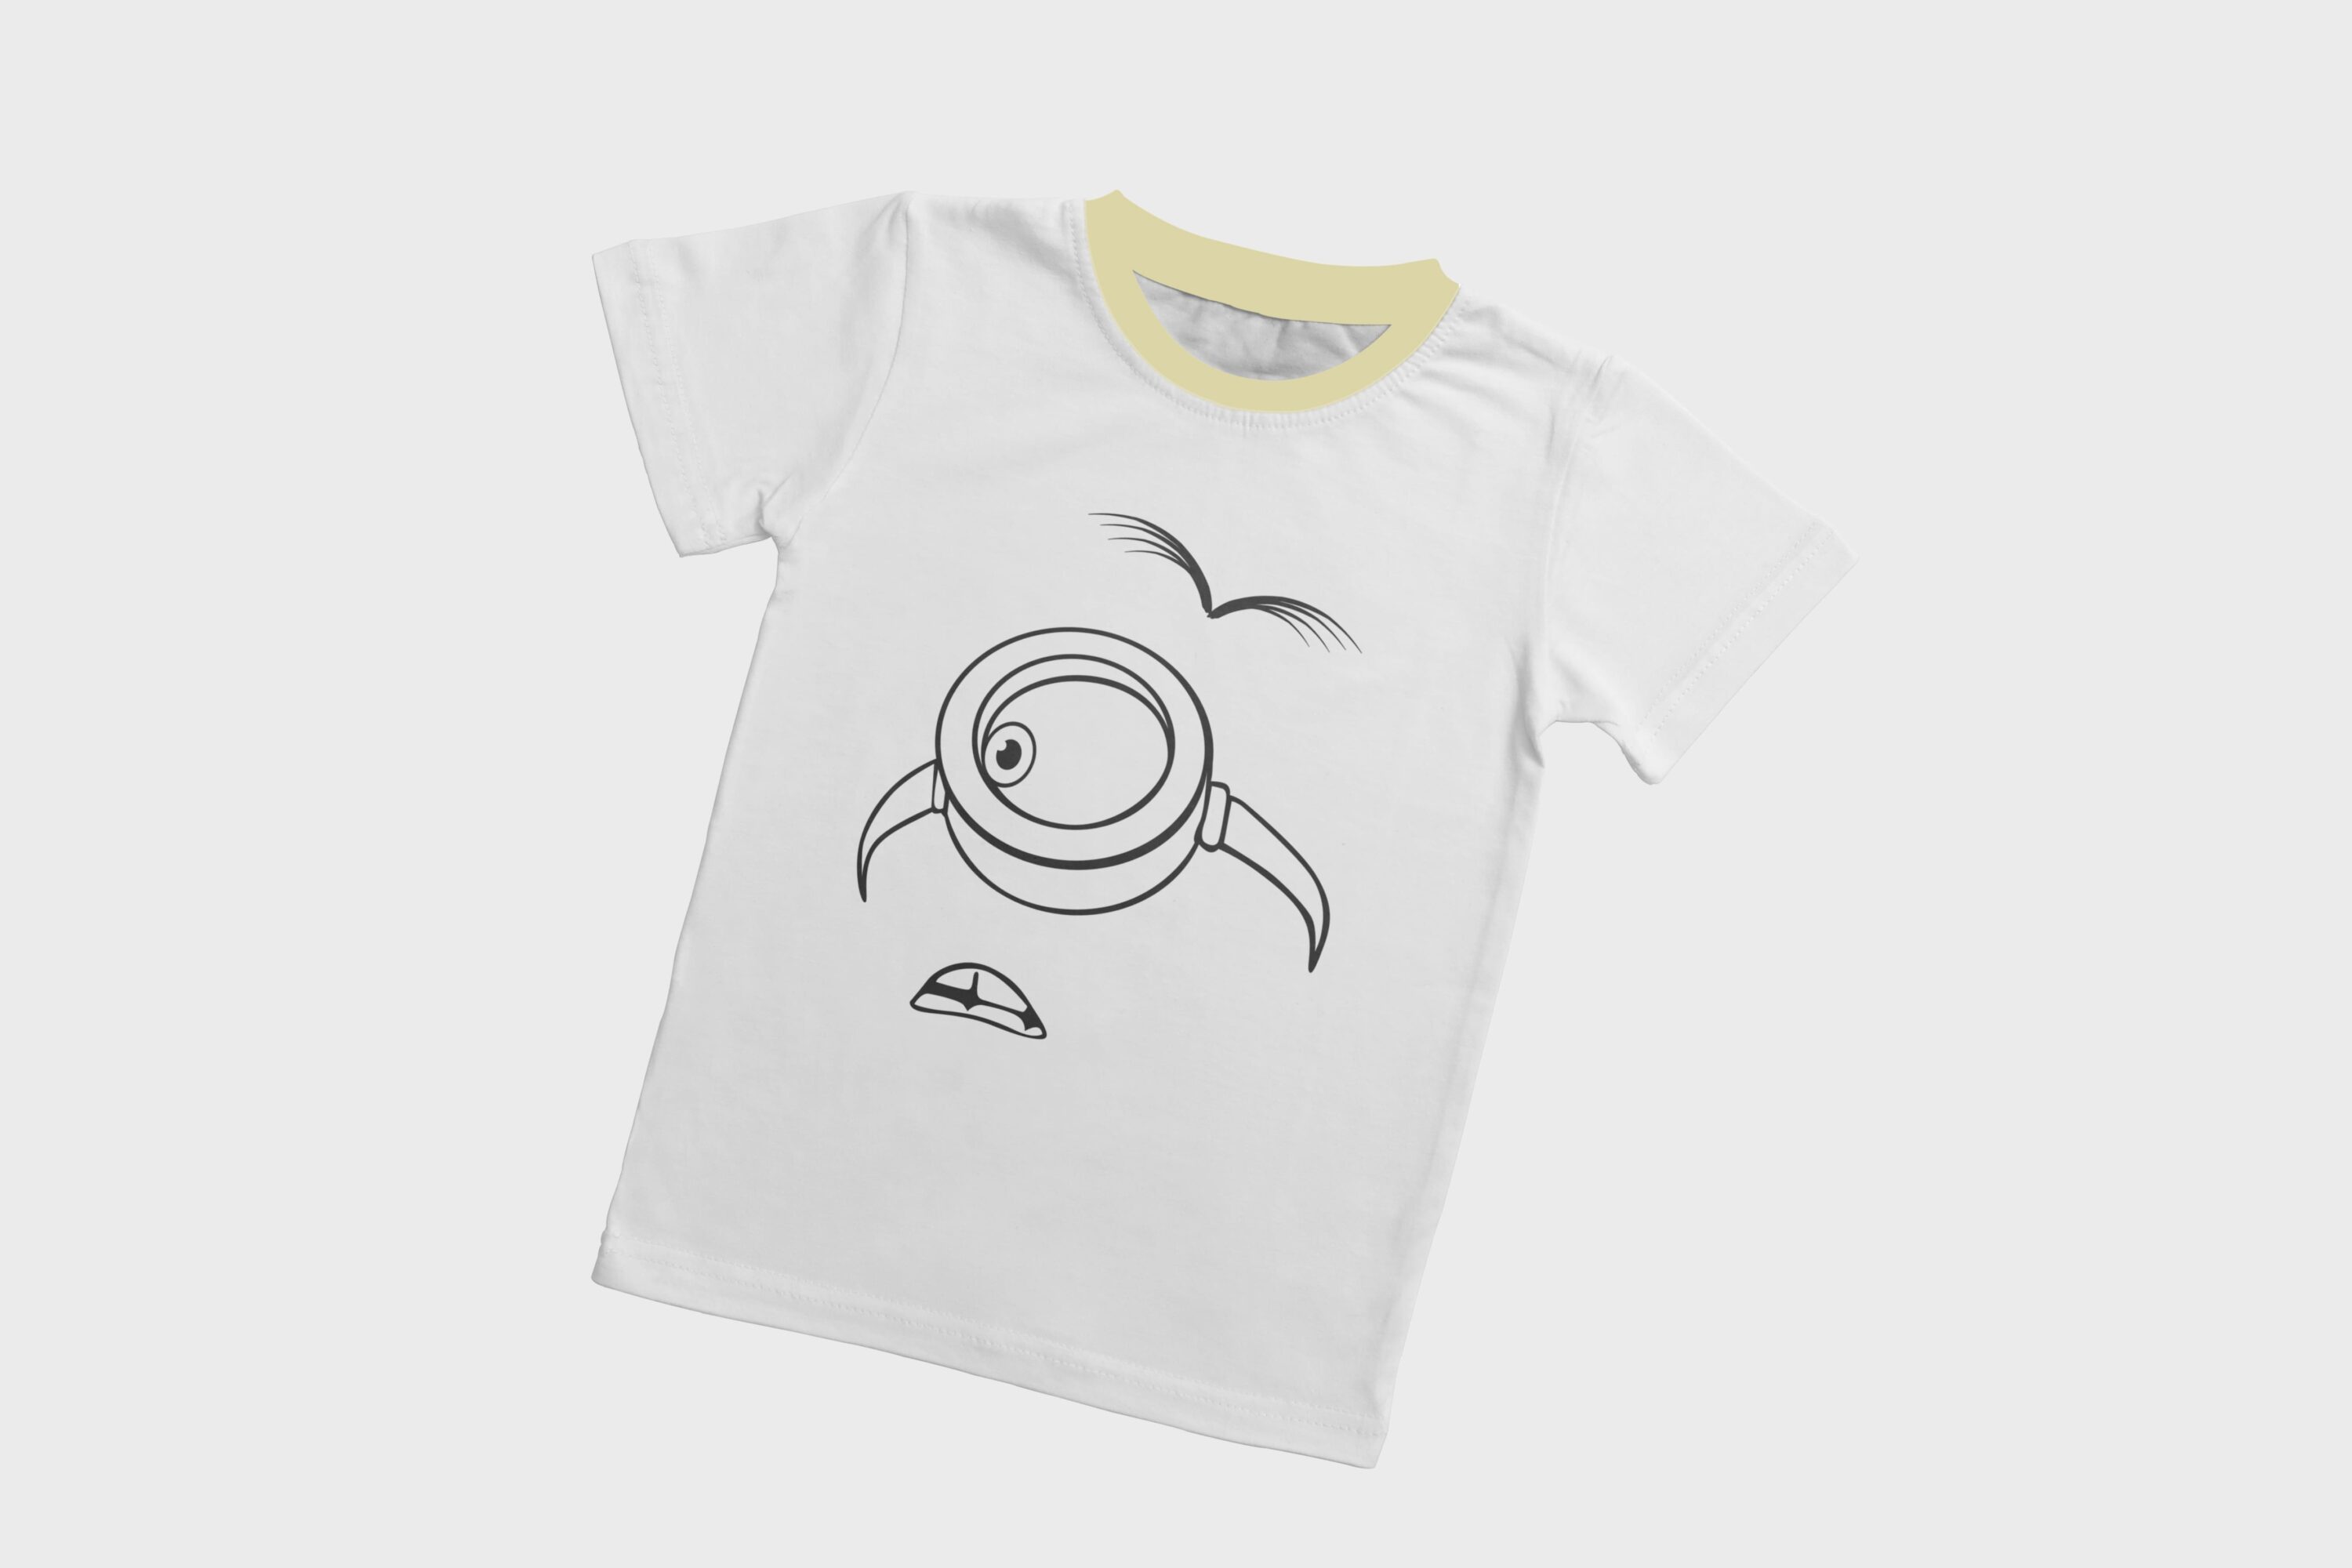 A white T-shirt with a dirty yellow collar and a silhouette face of a surprised minion with one eye.